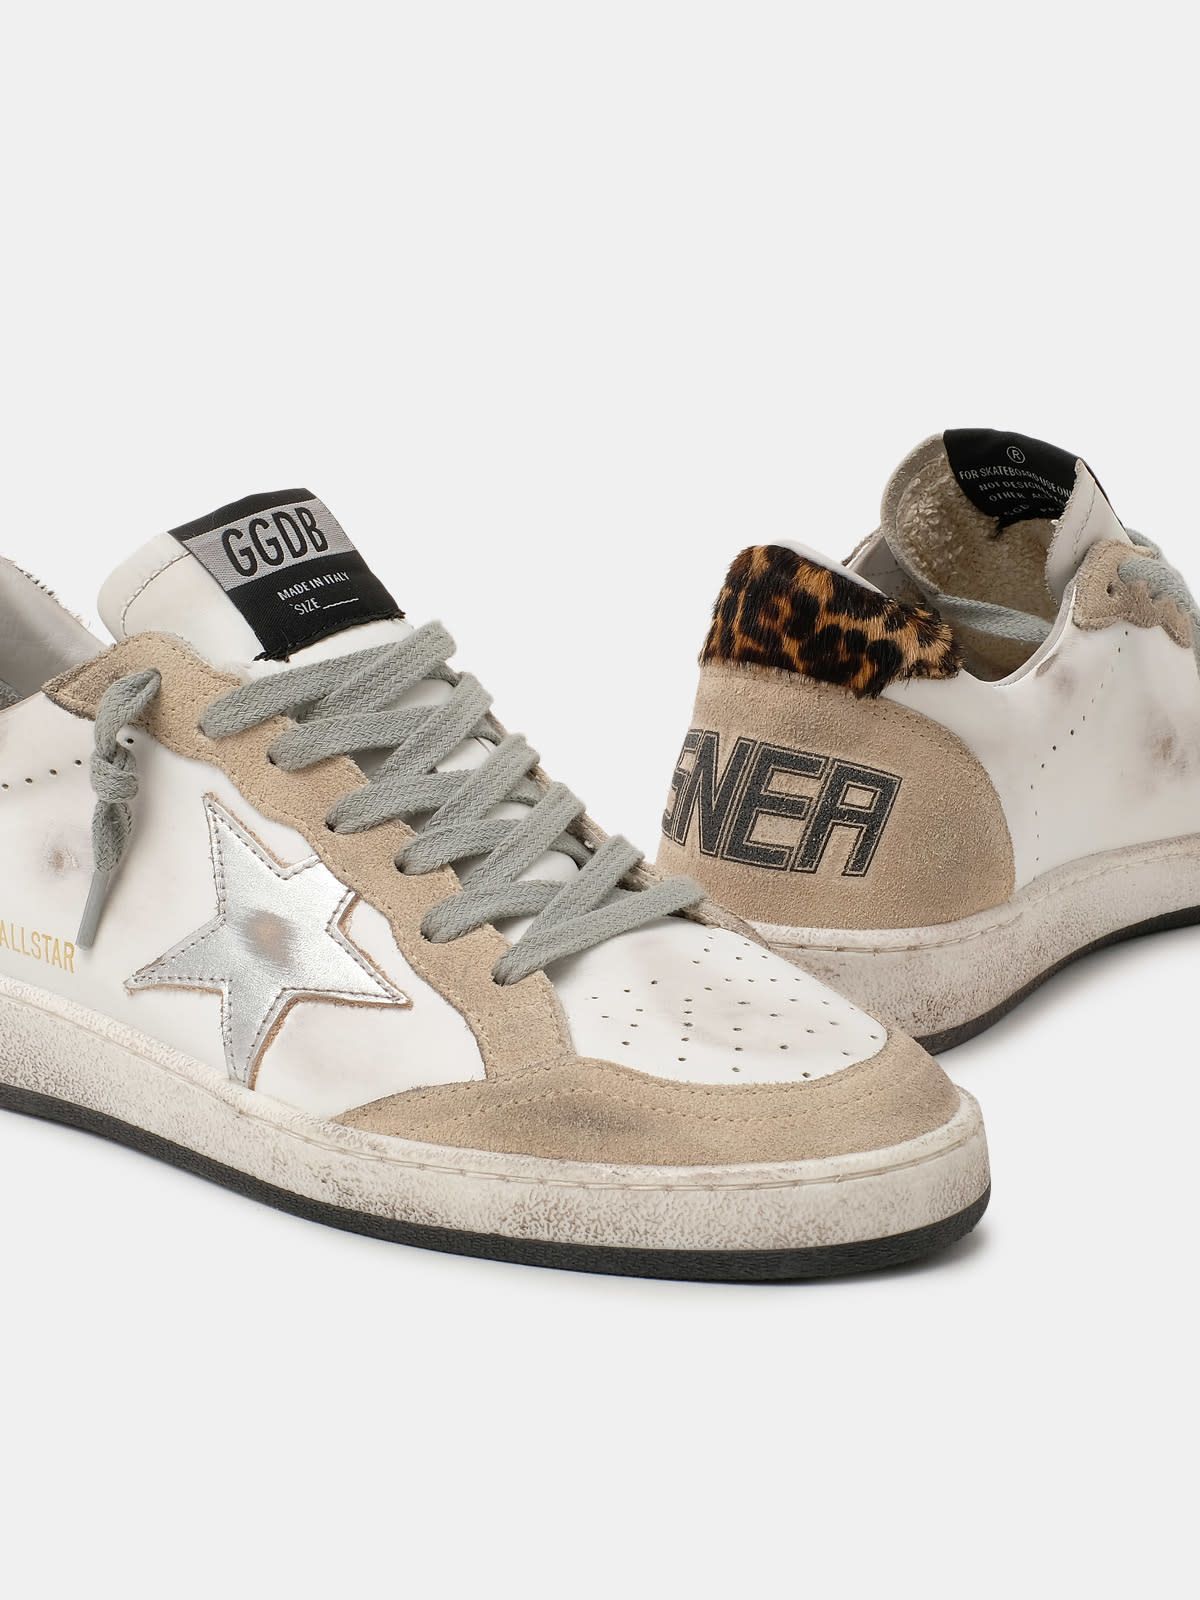 Ball Star sneakers with leopard-print heel tab